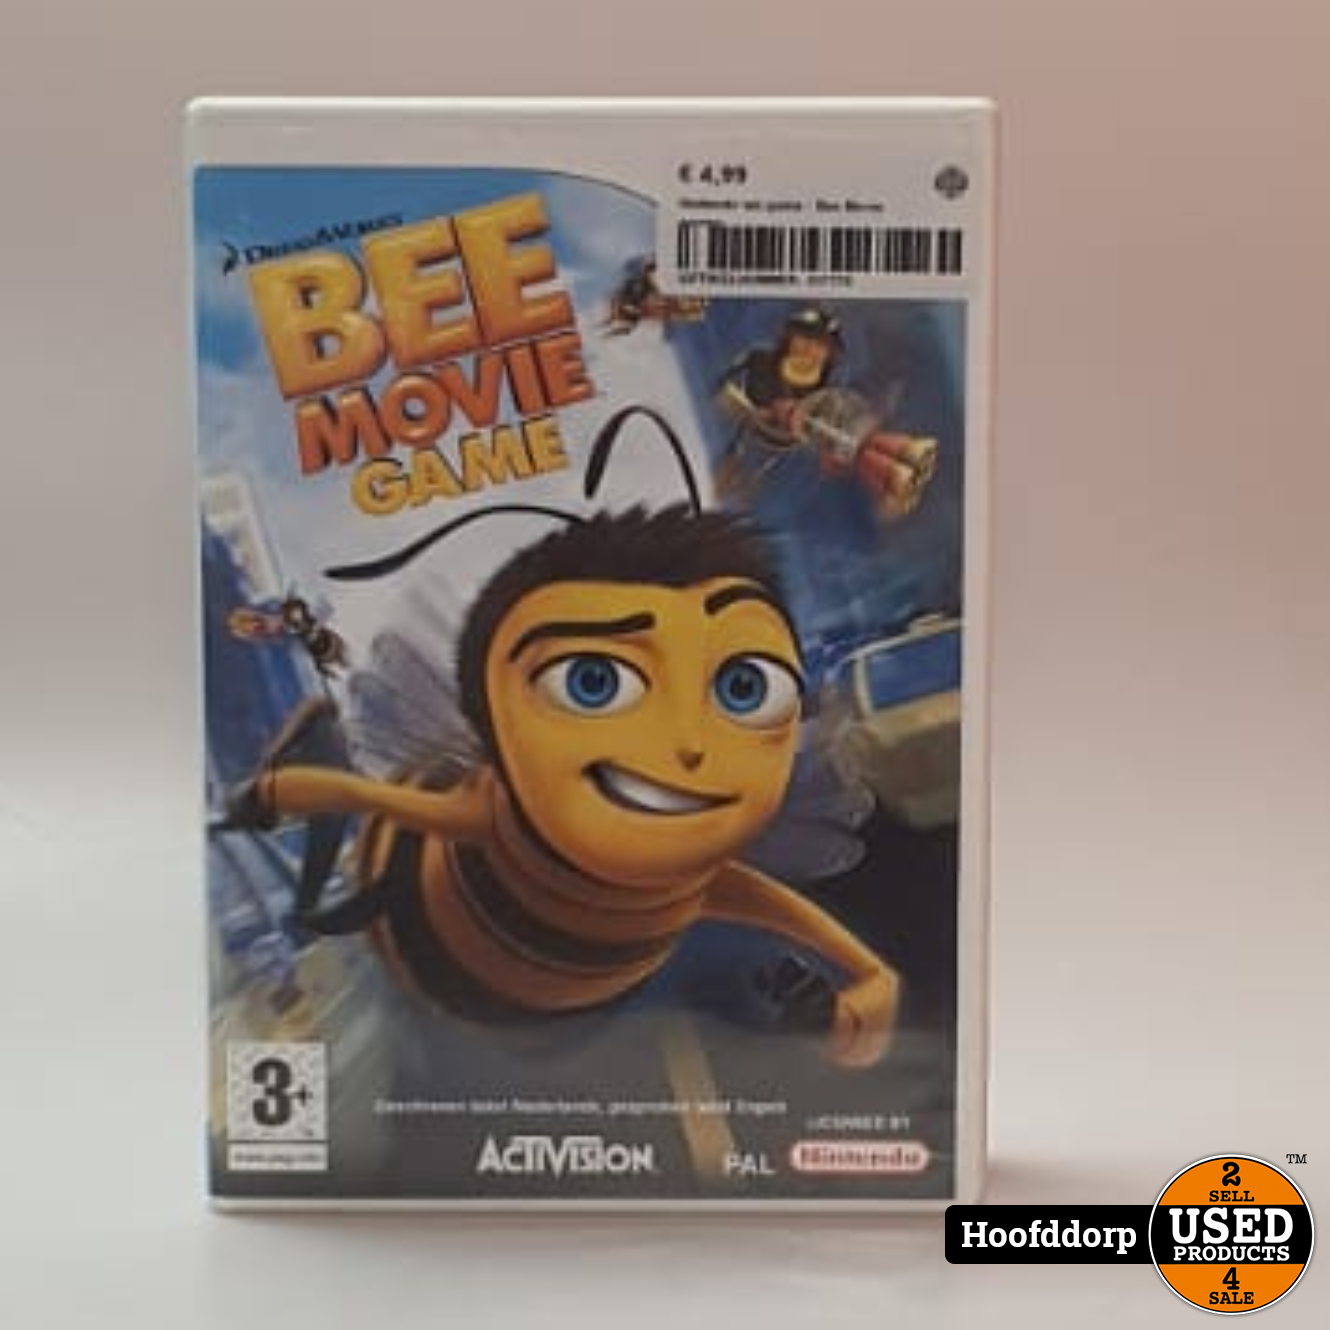 Nintendo Wii Game : Bee Movie Games - Used Products Hoofddorp